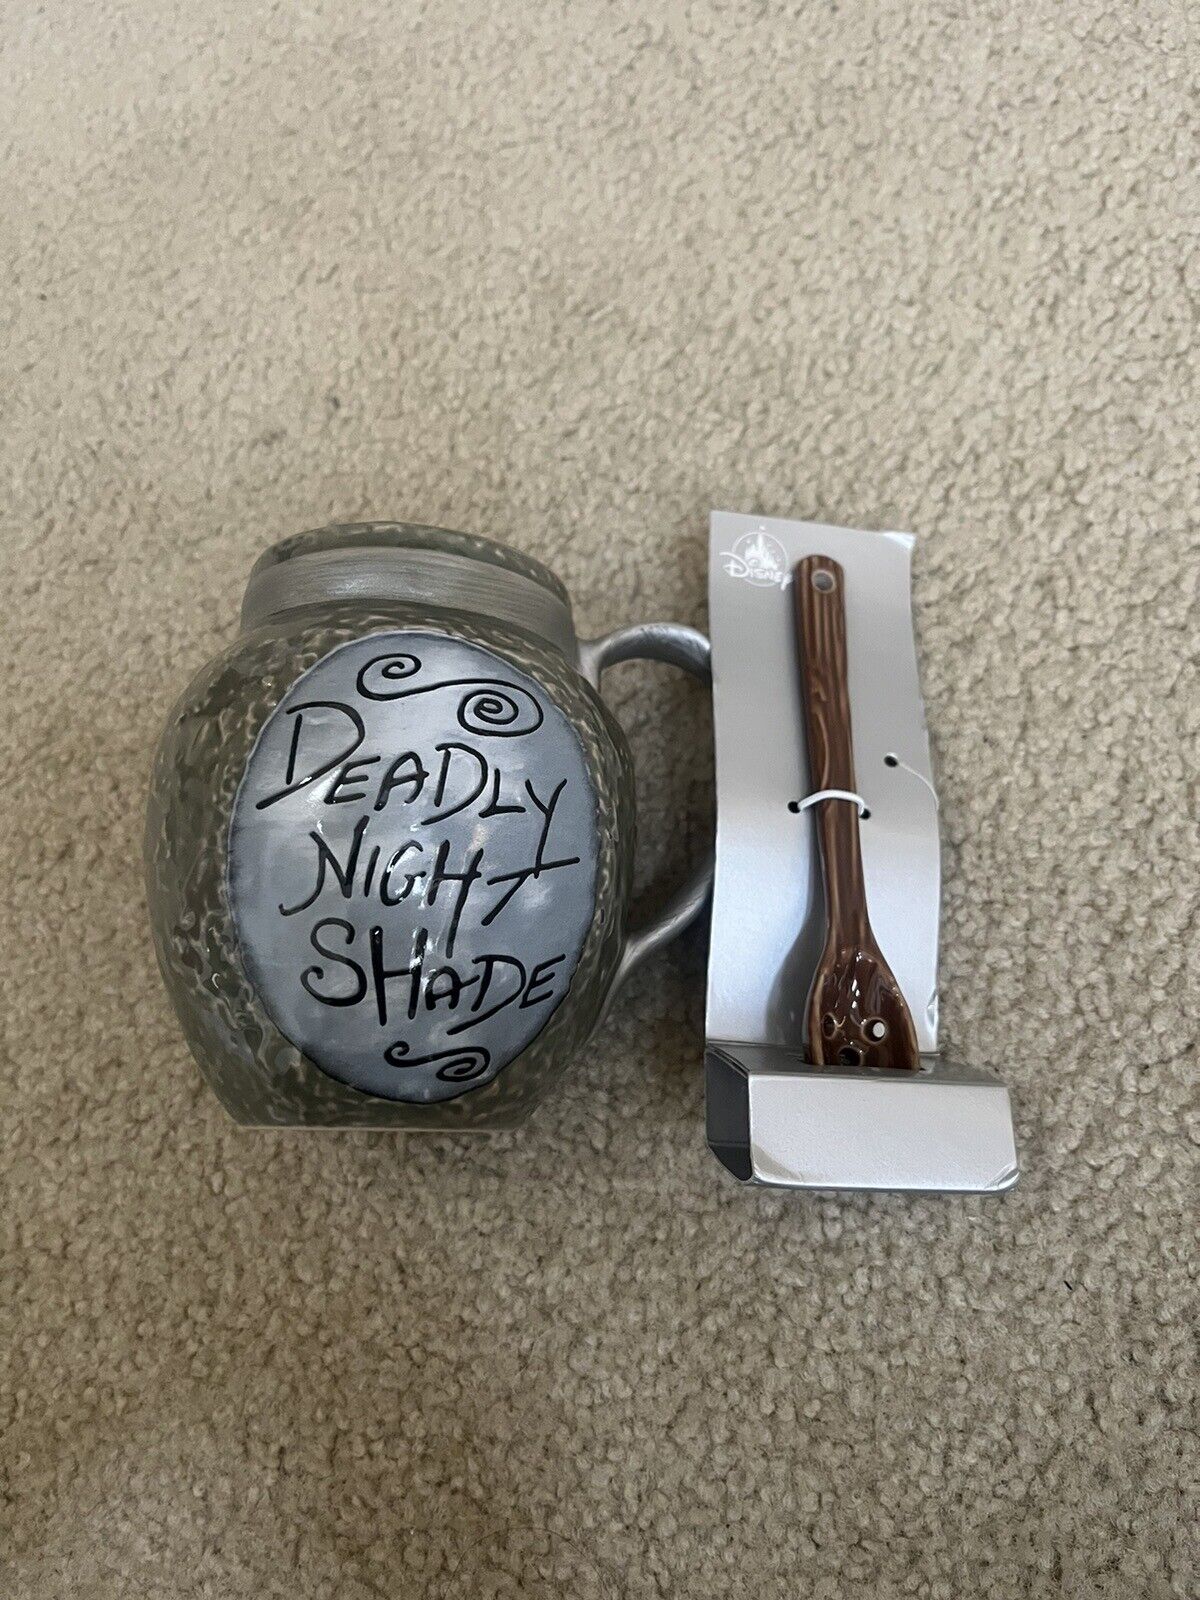 Disney The Nightmare Before Christmas Jack Deadly Night Shade Mug with Spoon NEW